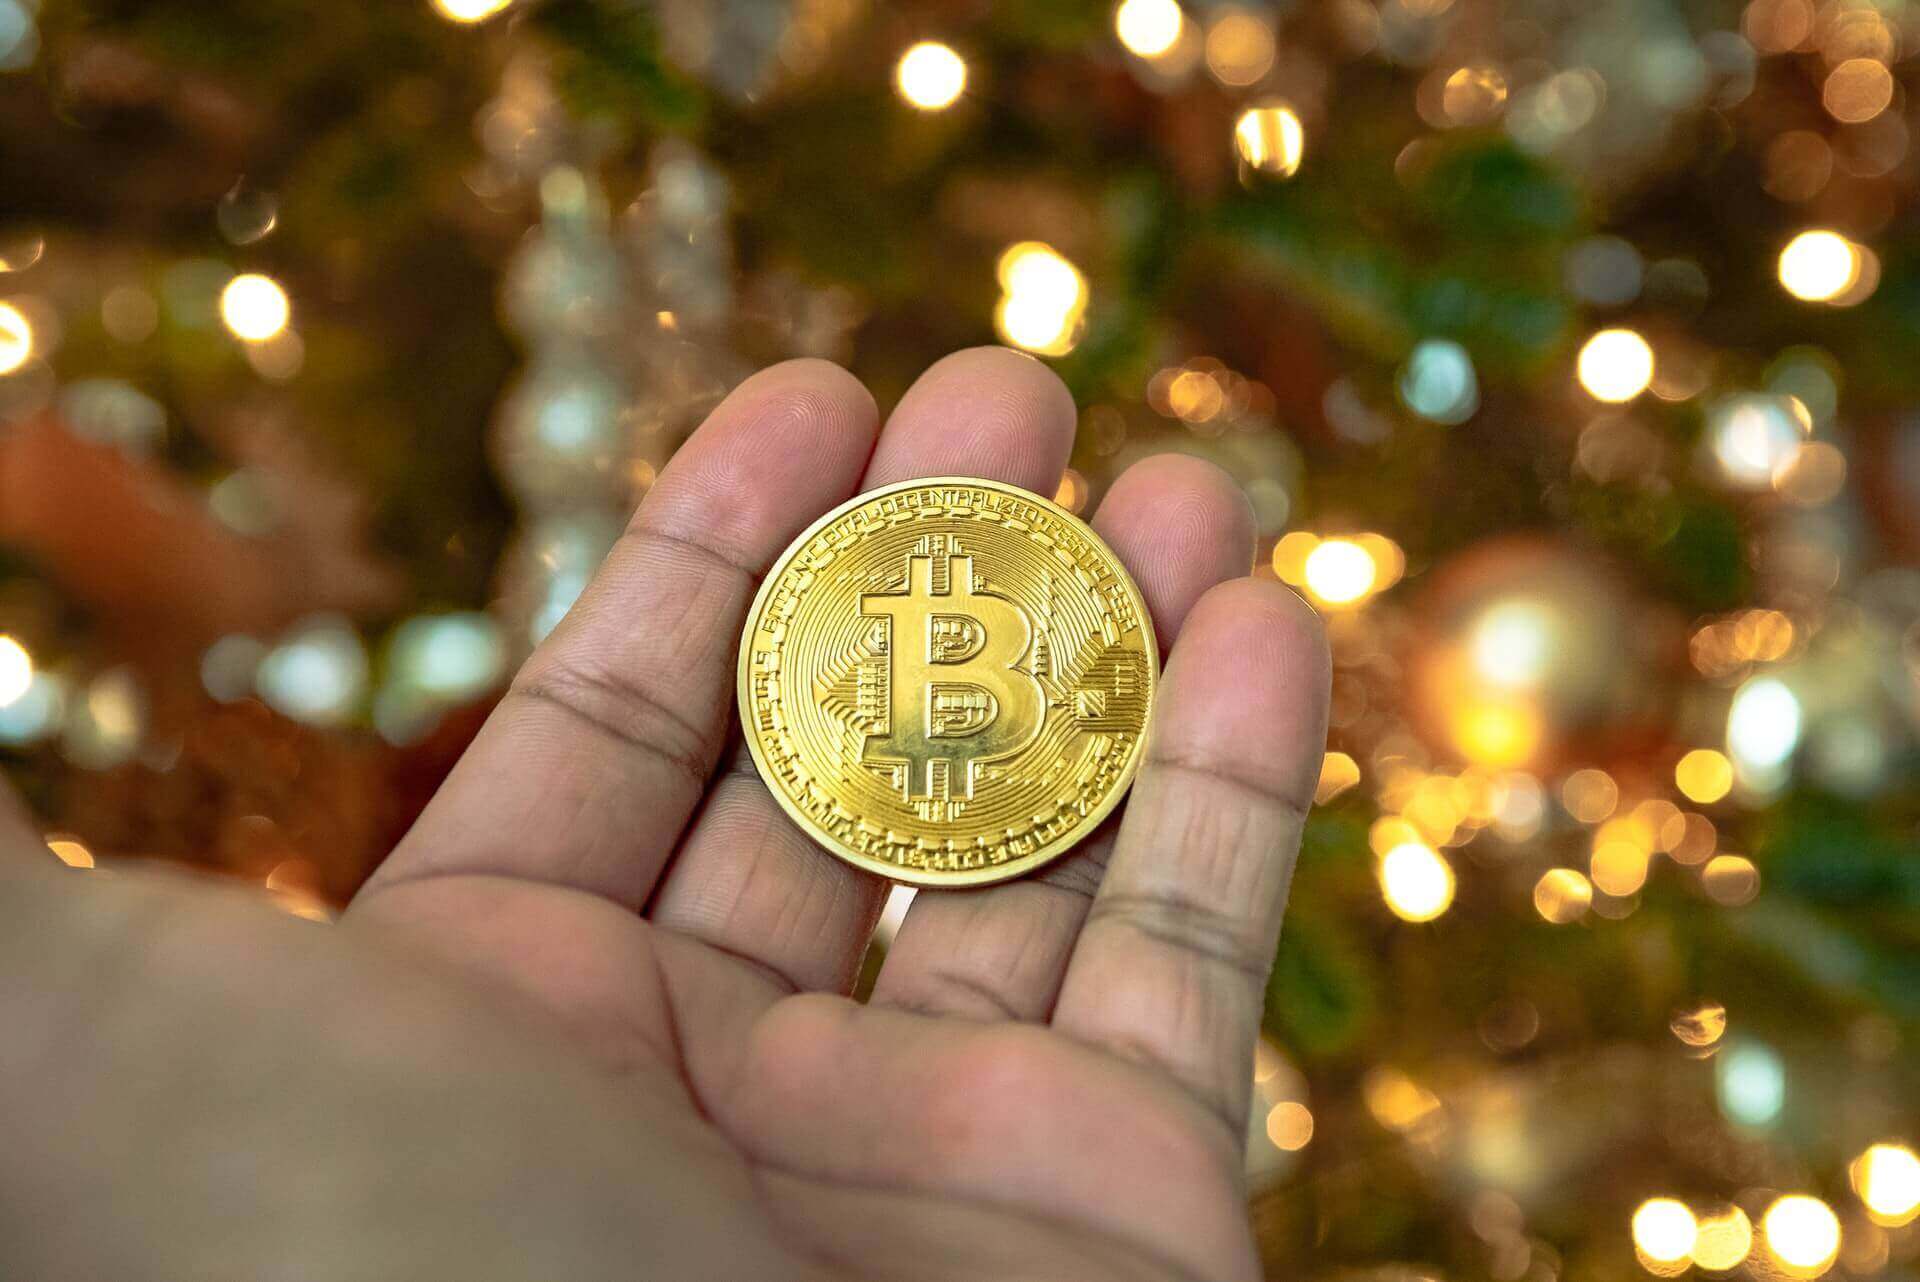 Estimated Price Of Bitcoin In 2021 : Bitcoin surge continues as $100k becomes realistic target ... : The surge in bitcoin's price since the start of 2021 could result in the cryptocurrency having a carbon footprint the same as that of london, according to research.